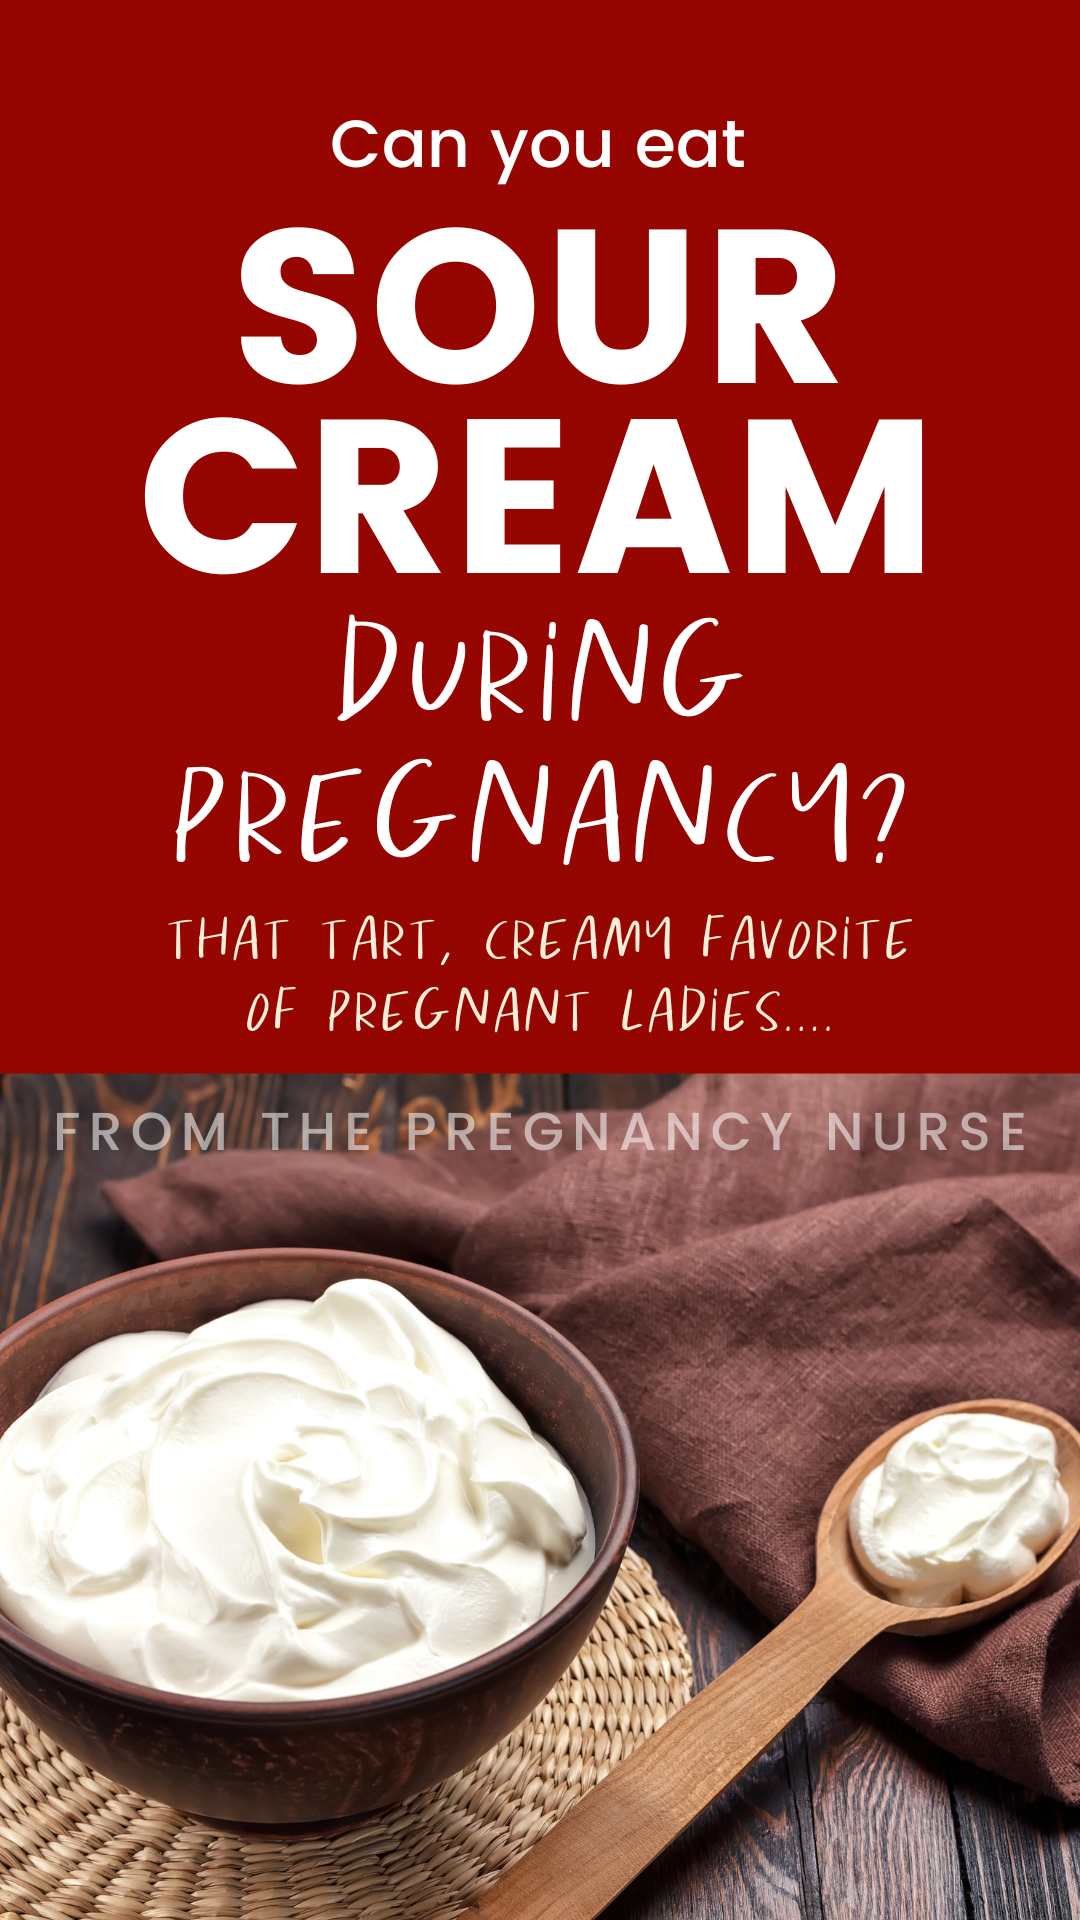 Sour cream is a dairy product that's high in fat and calories. It's also a good source of protein, calcium, and vitamin B12. Some women wonder if it's safe to eat sour cream during pregnancy. Here's what you need to know about eating sour cream while pregnant.